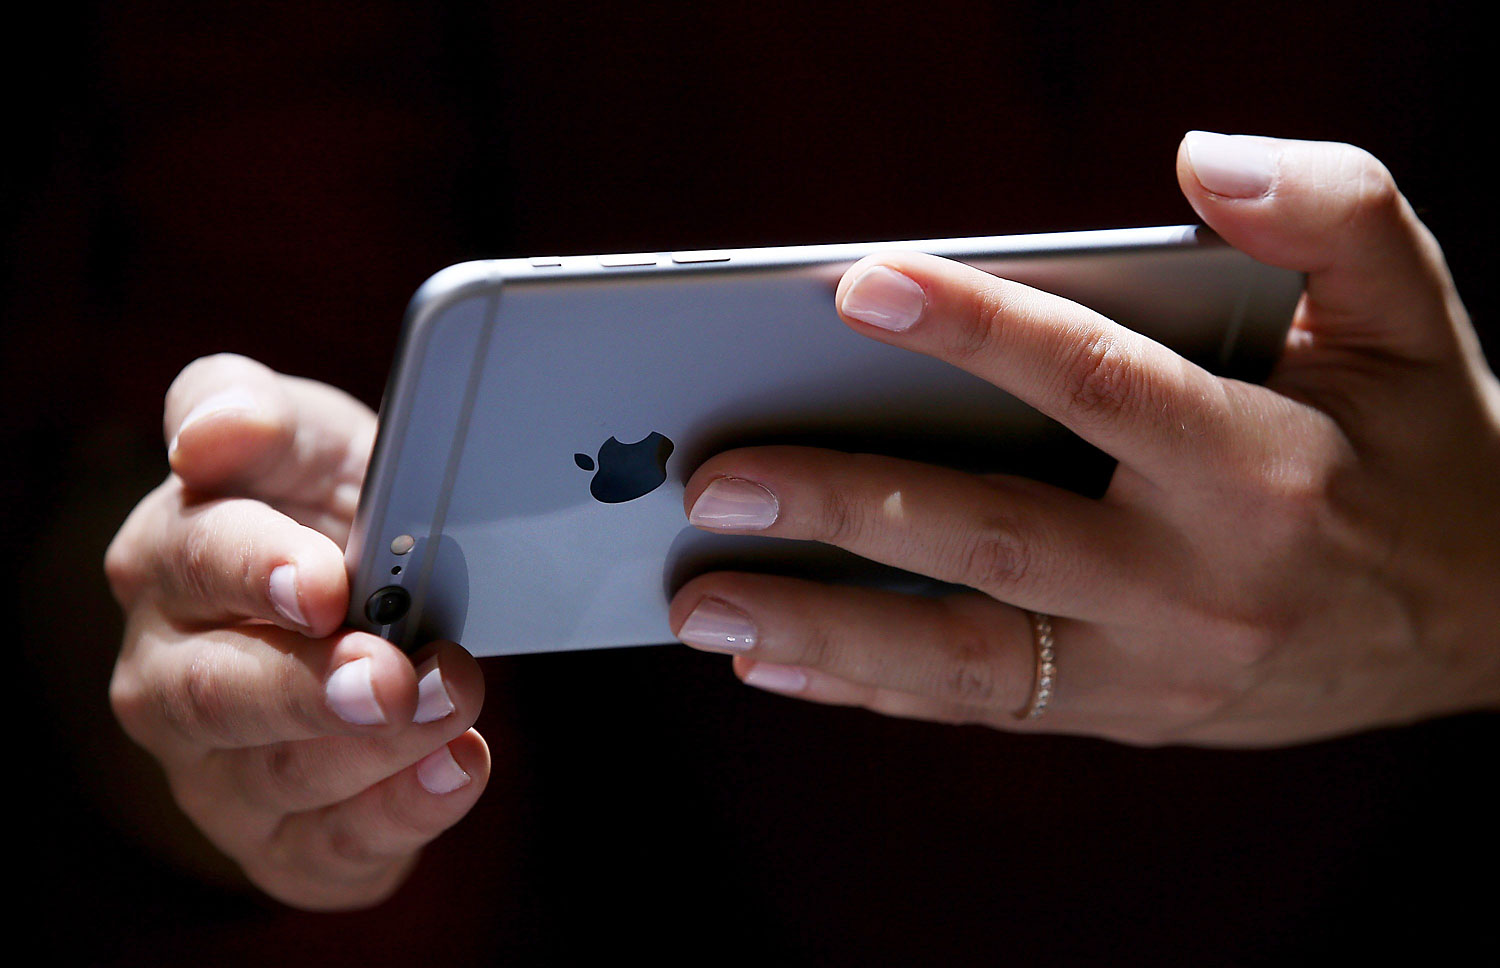 A member of the media inspects the new iPhone 6 during an Apple special event in Cupertino, Calif., on Sept. 9, 2014 (Justin Sullivan—Getty Images)